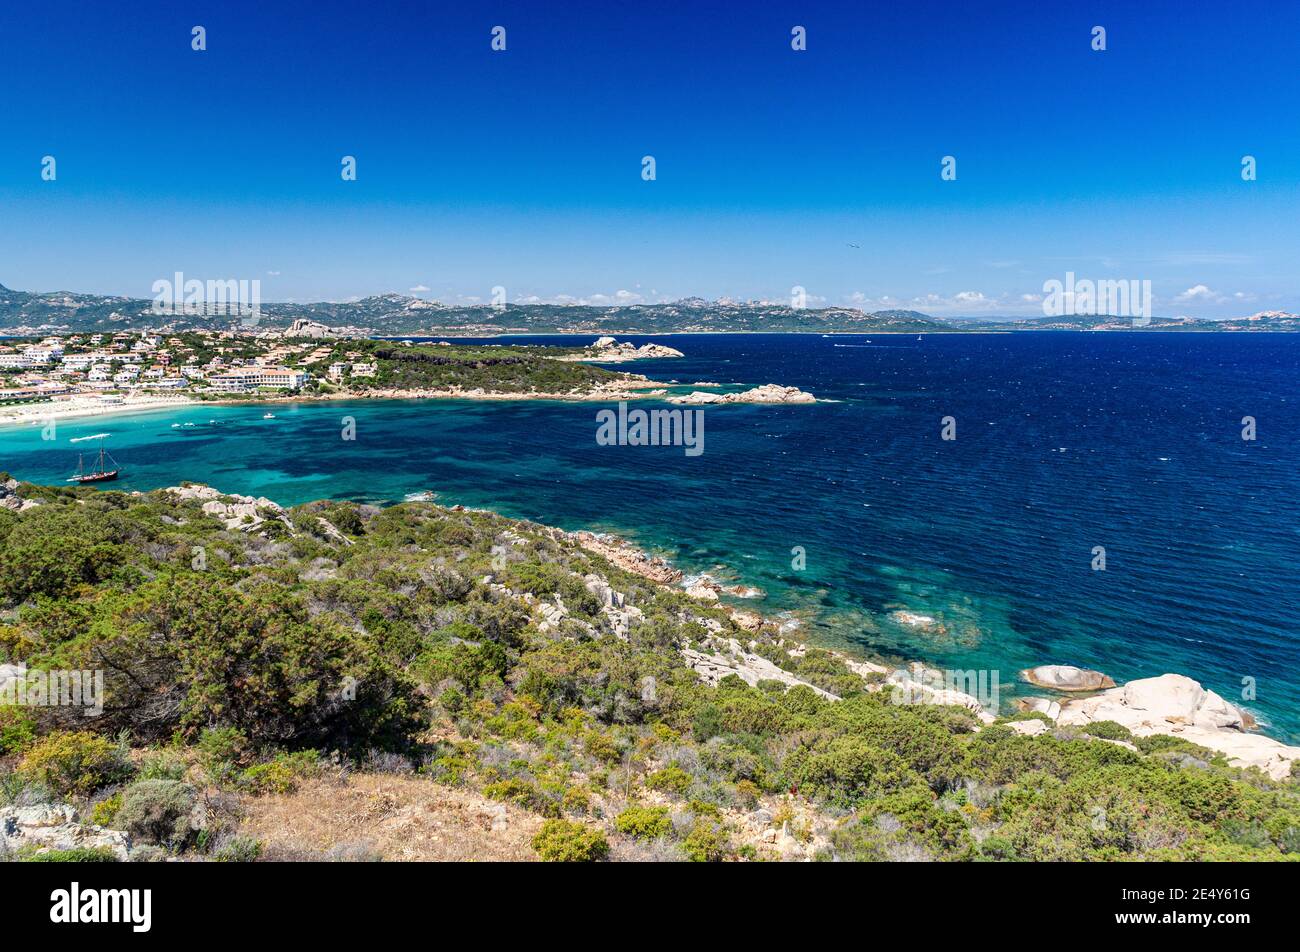 Colourful Early Summer View of the Northern Coast of Sardinia With Baia Sardinia, Capo d’Orso, Distant Island of La Madallena and Turquoise Mediterran Stock Photo